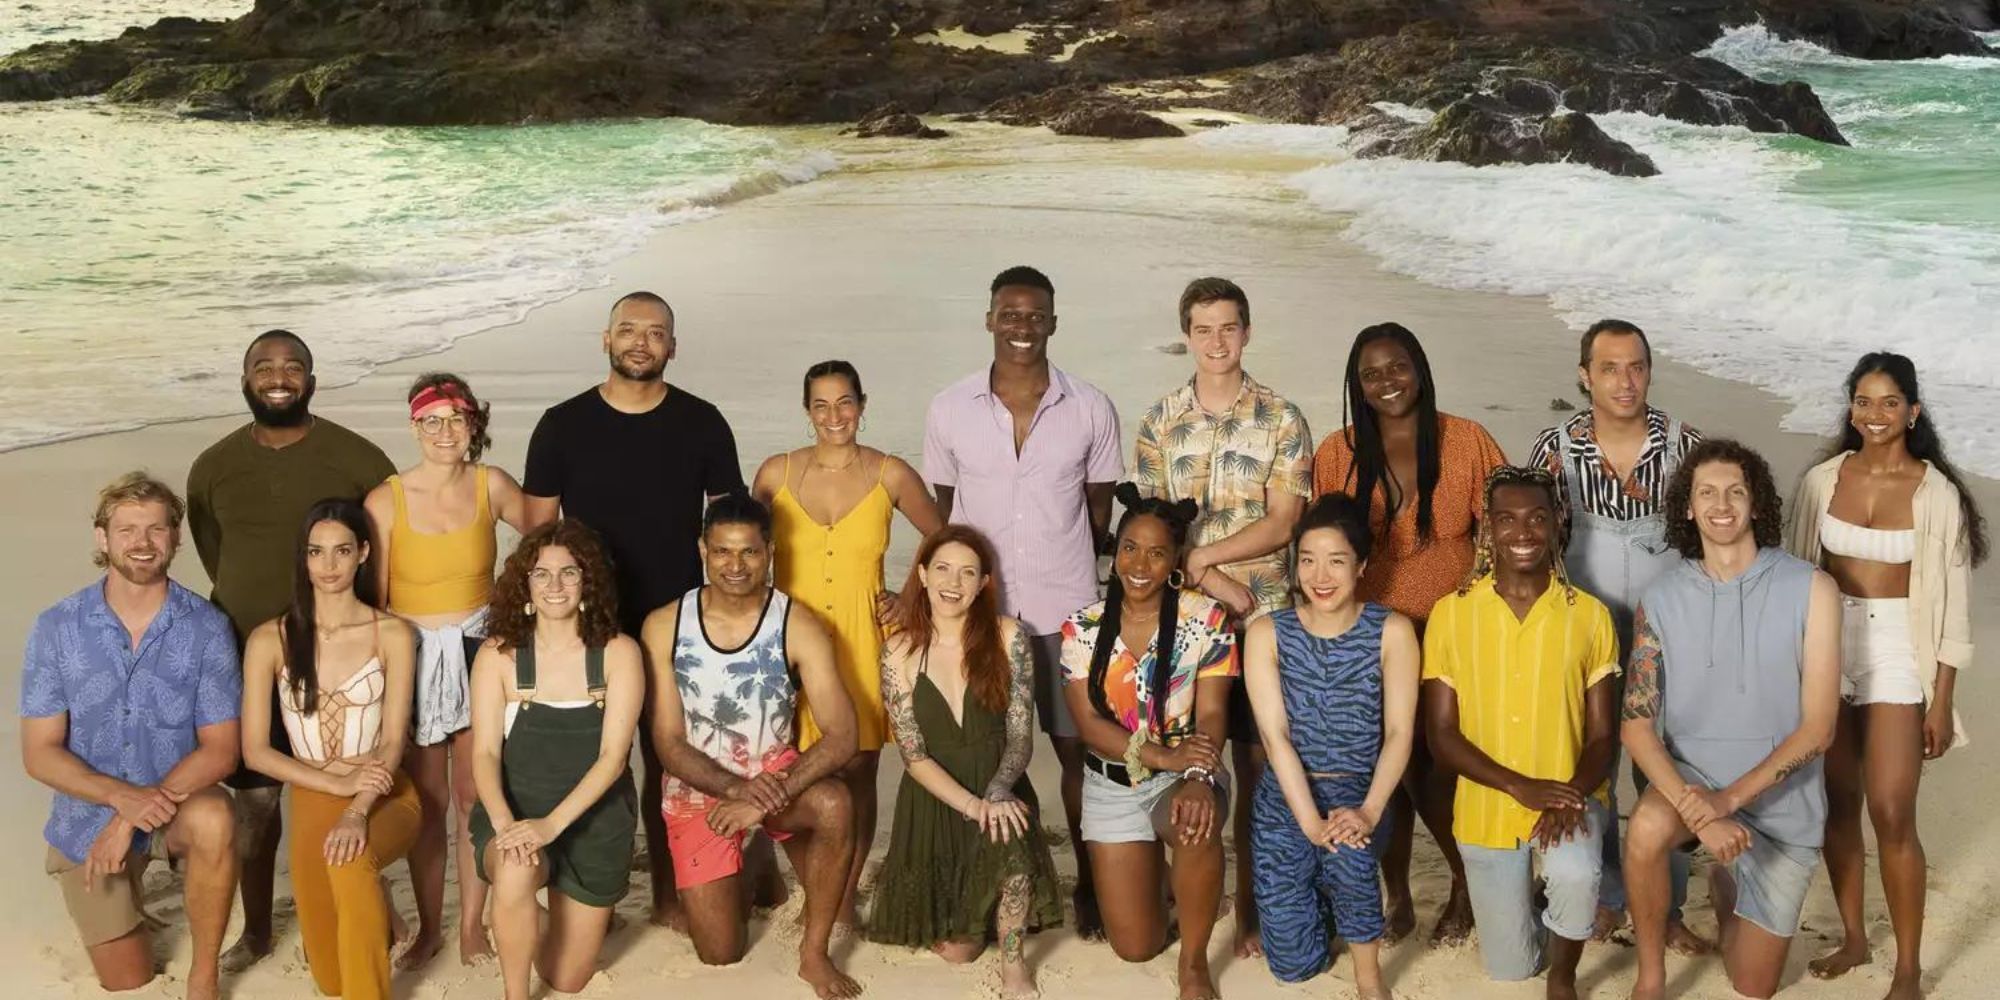 survivor 46 cast posing for promo pic on the beach